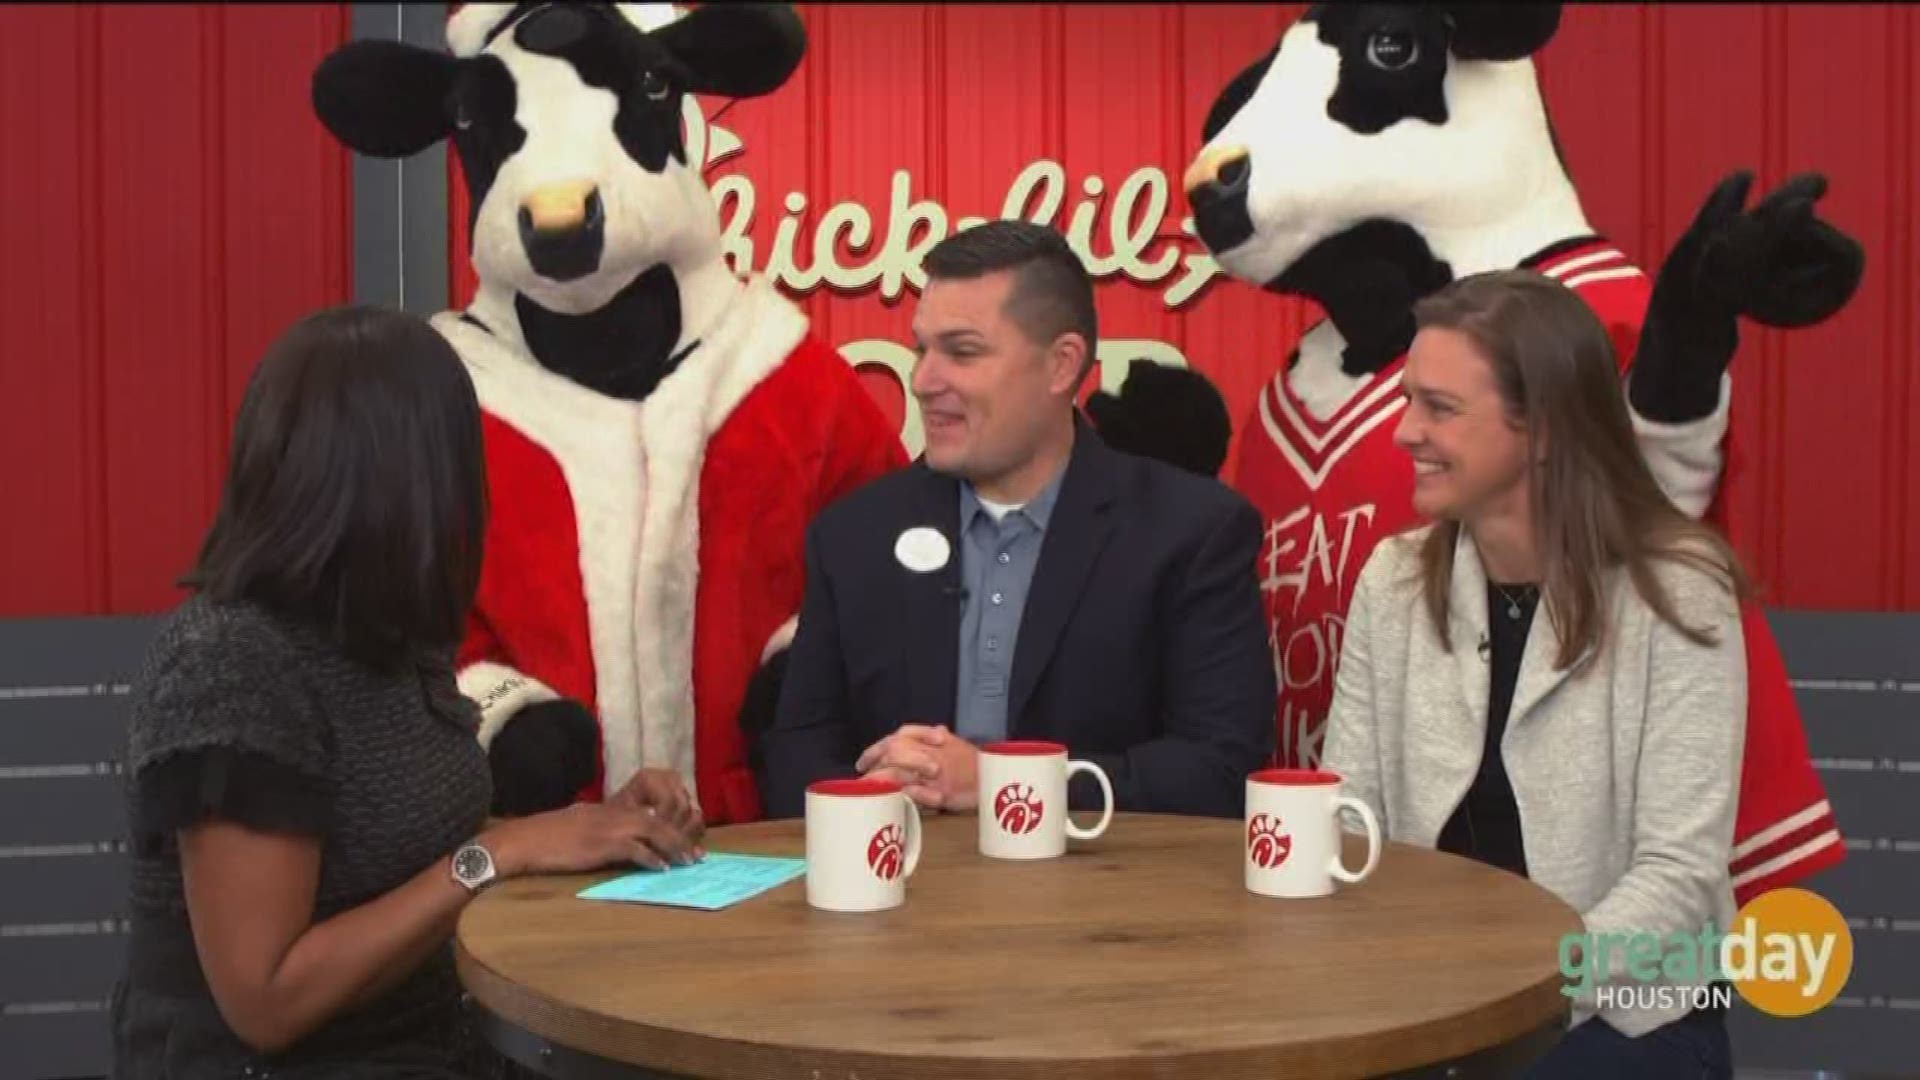 Chick-fil-a owner / operator Greg Kubala discusses why Family Point Resources was chosen to receive the Chick-Fil-A Foundation True Inspiration Award.